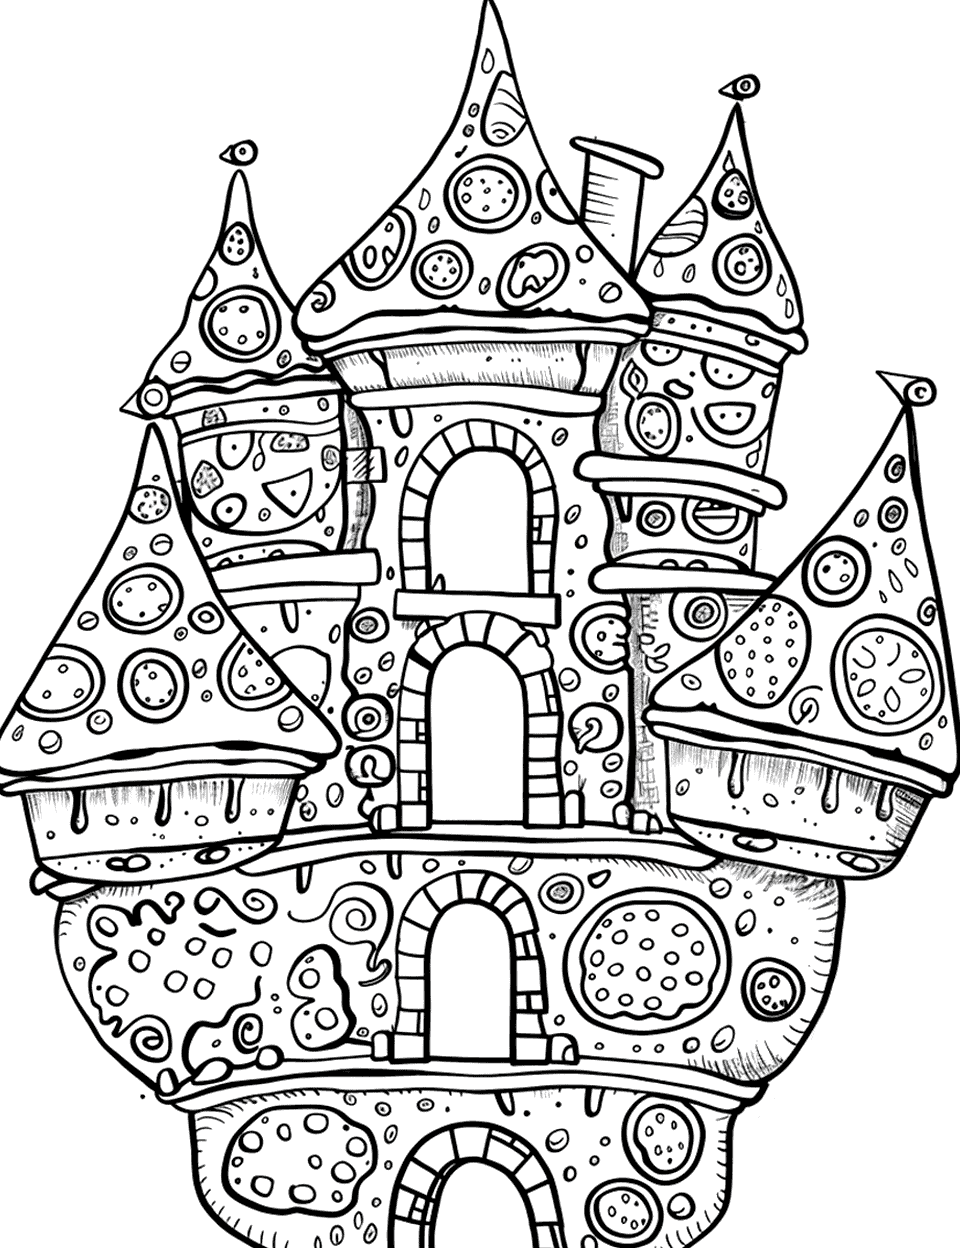 Pizza Castle Fantasy Coloring Page - A fantasy castle made entirely out of pizza ingredients.